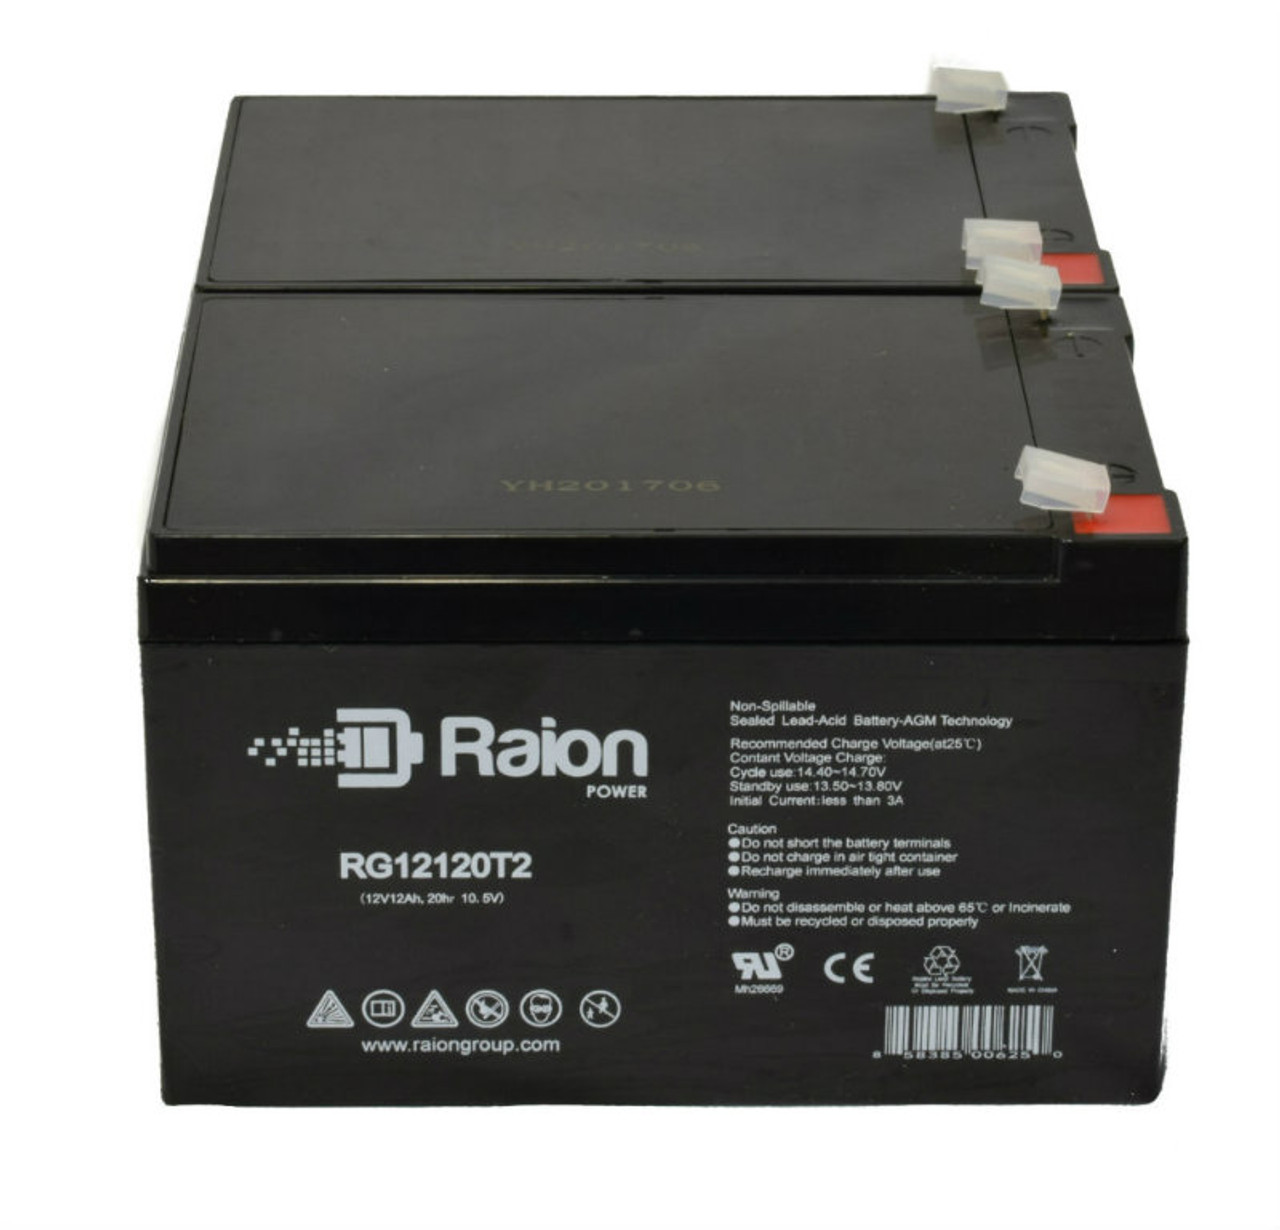 Raion Power 12V 12Ah Non-Spillable Compatible Replacement Battery for Ya Heng 6FM10 - (2 Pack)